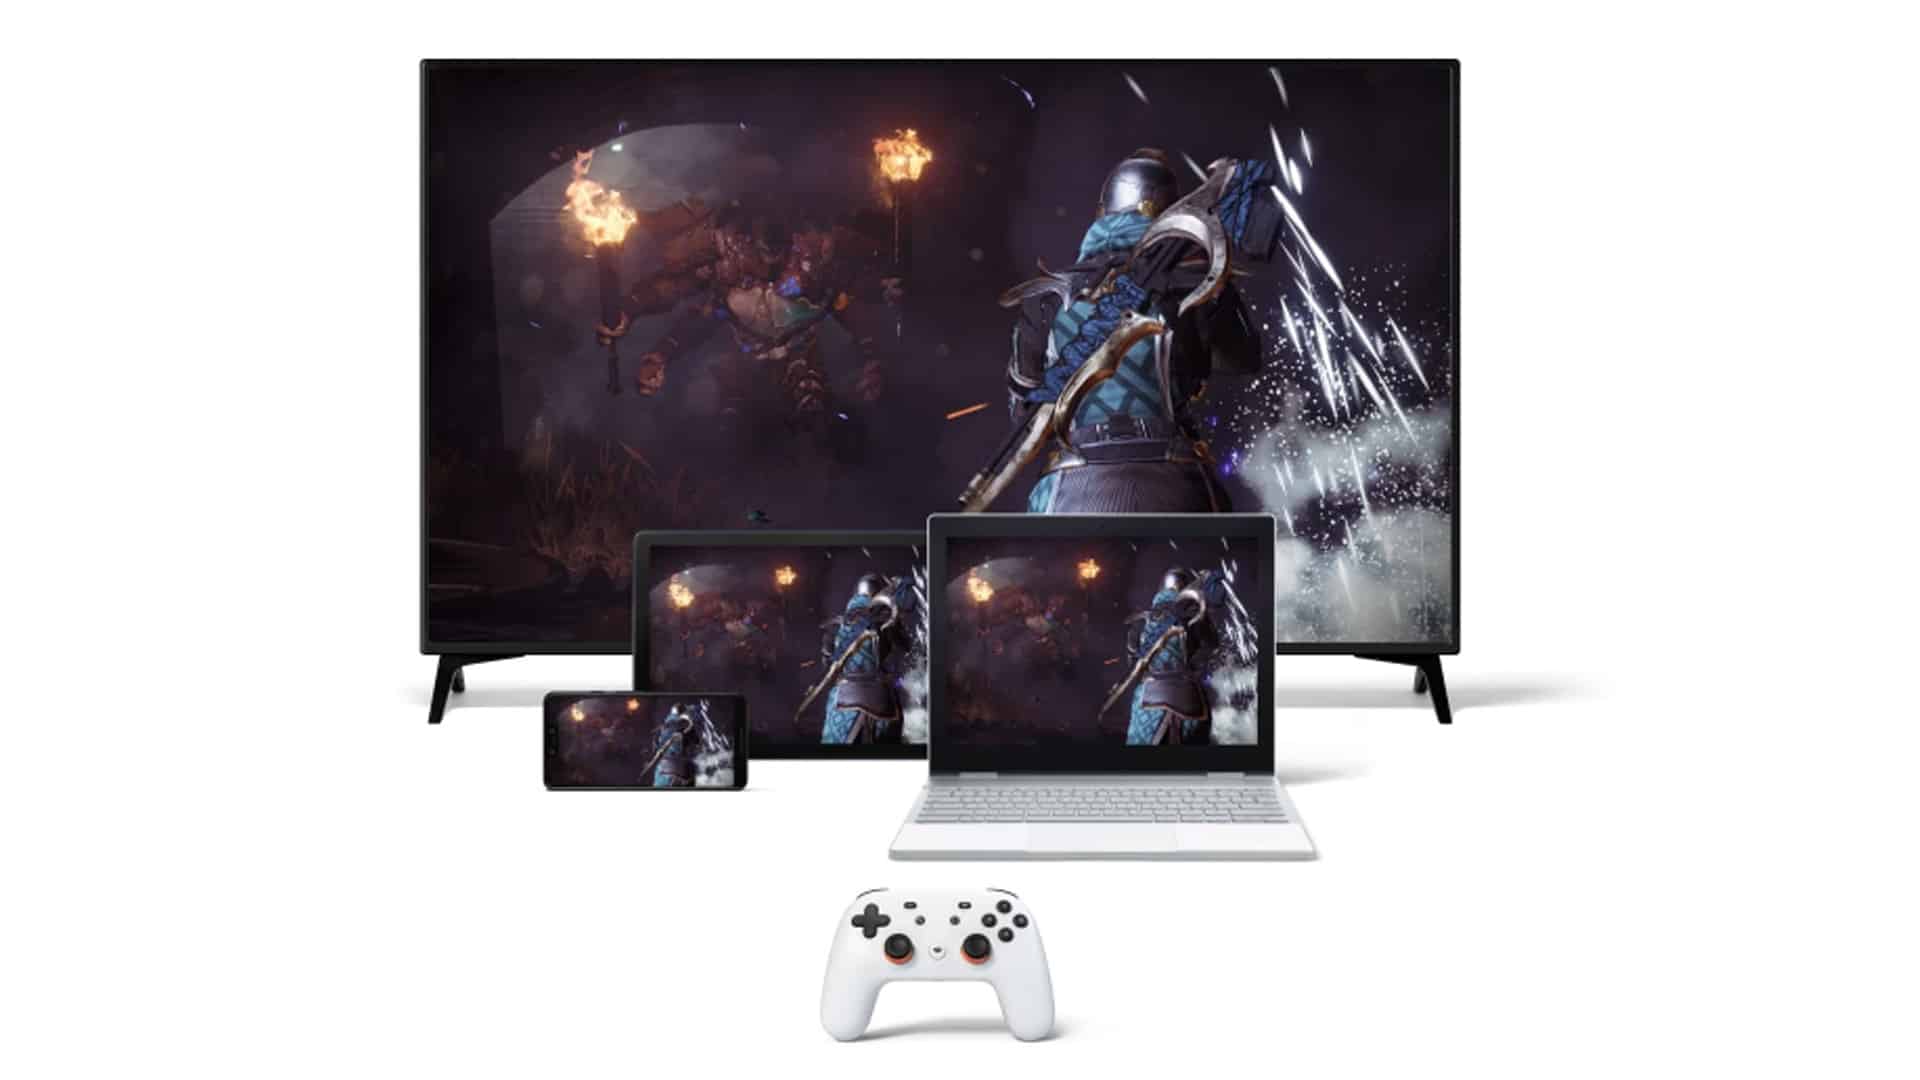 Google's game streaming service, Stadia, is dead